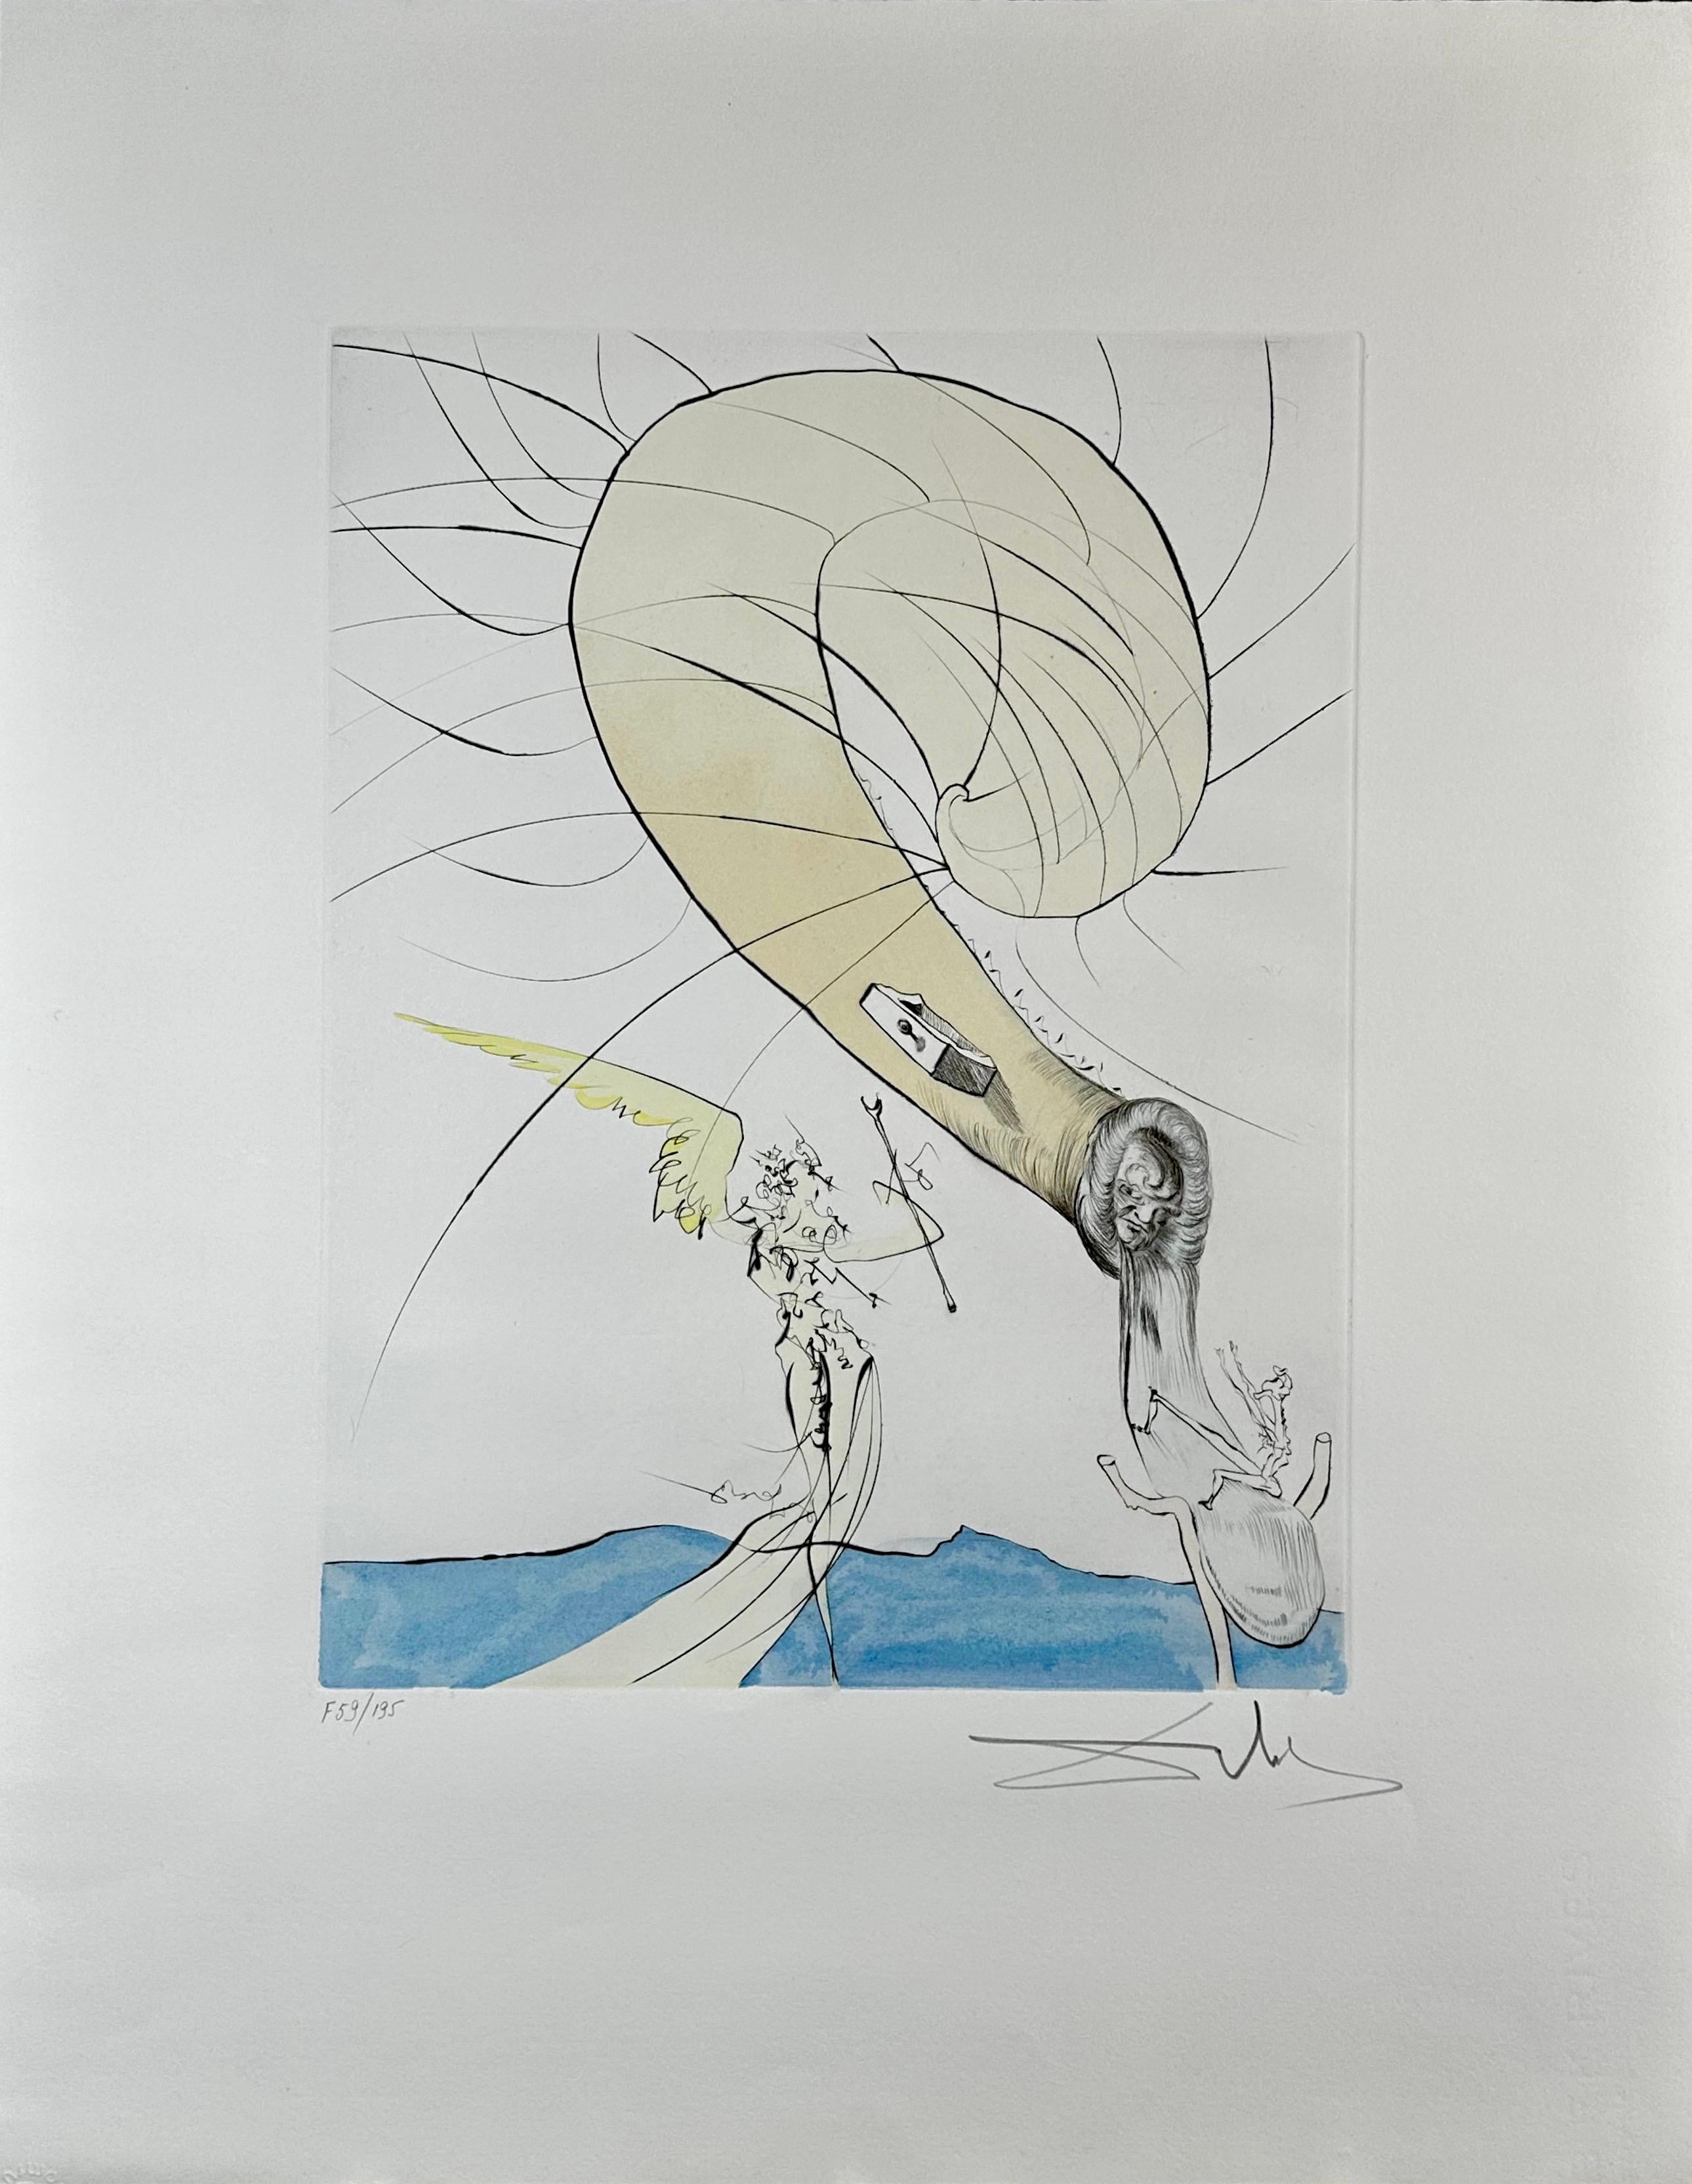 Salvador Dalí Figurative Print - After 50 Years of Surrealism Freud with Snail Head